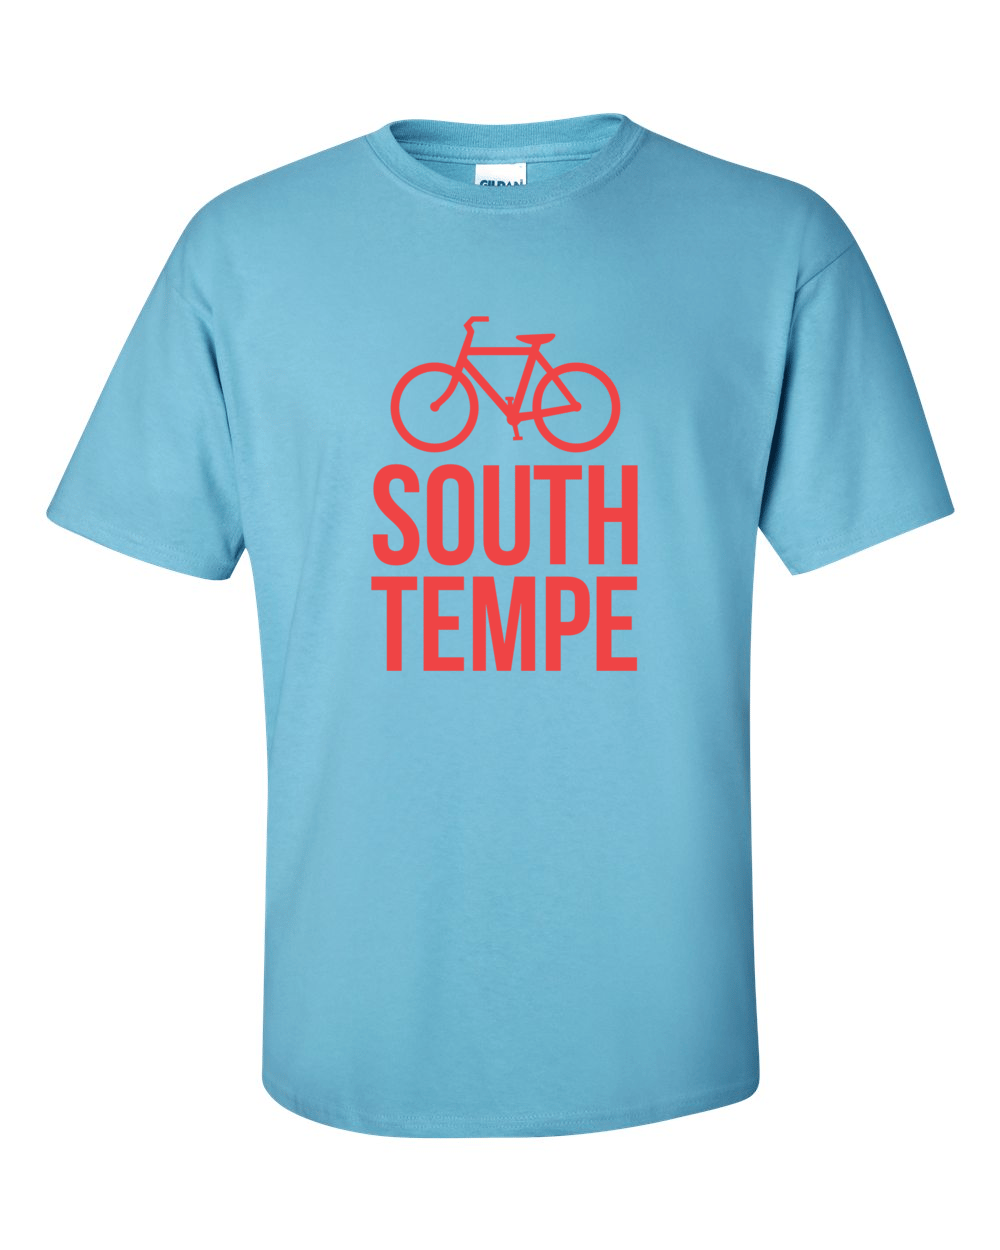 Image of South Tempe - Sky Blue Shirt with Red Letters